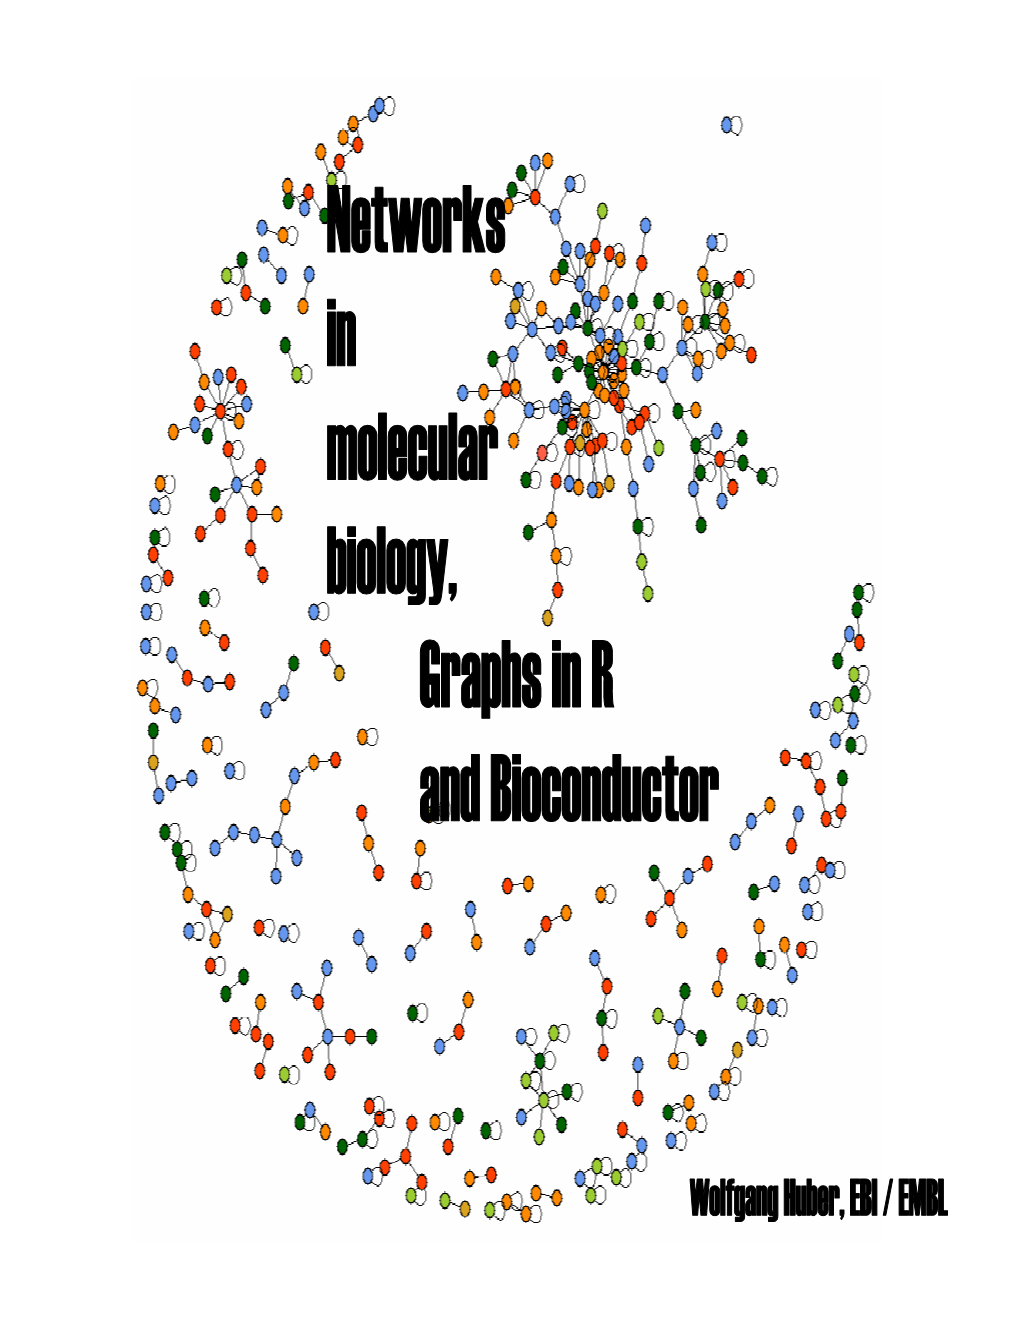 Networks in Molecular Biology, Graphs in R and Bioconductor